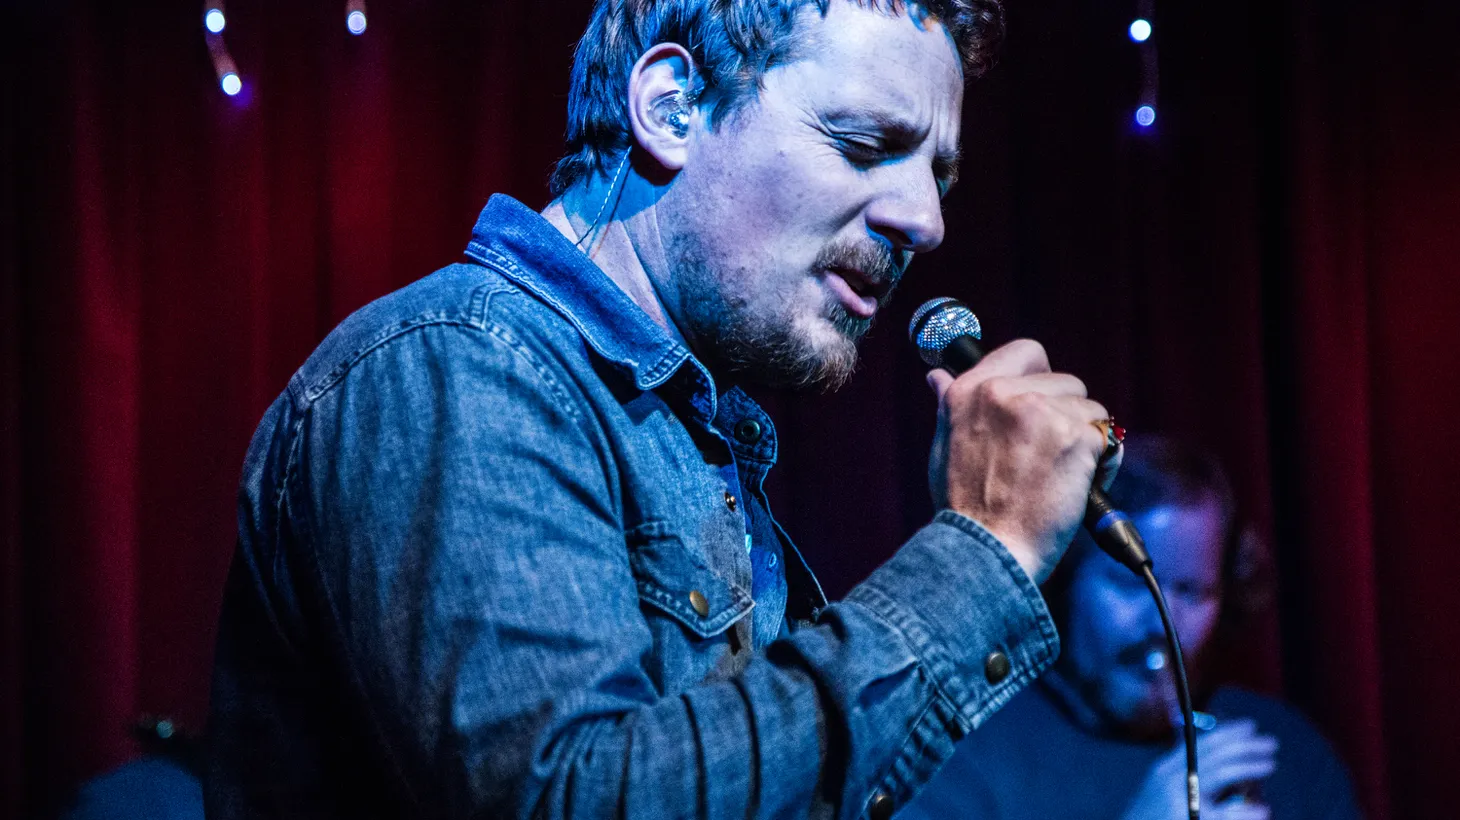 Sturgill Simpson is a country music outlaw. He just released the third in a series of career-defining albums, A Sailor's Guide To Earth, and played it front to back for us at Apogee Studio.